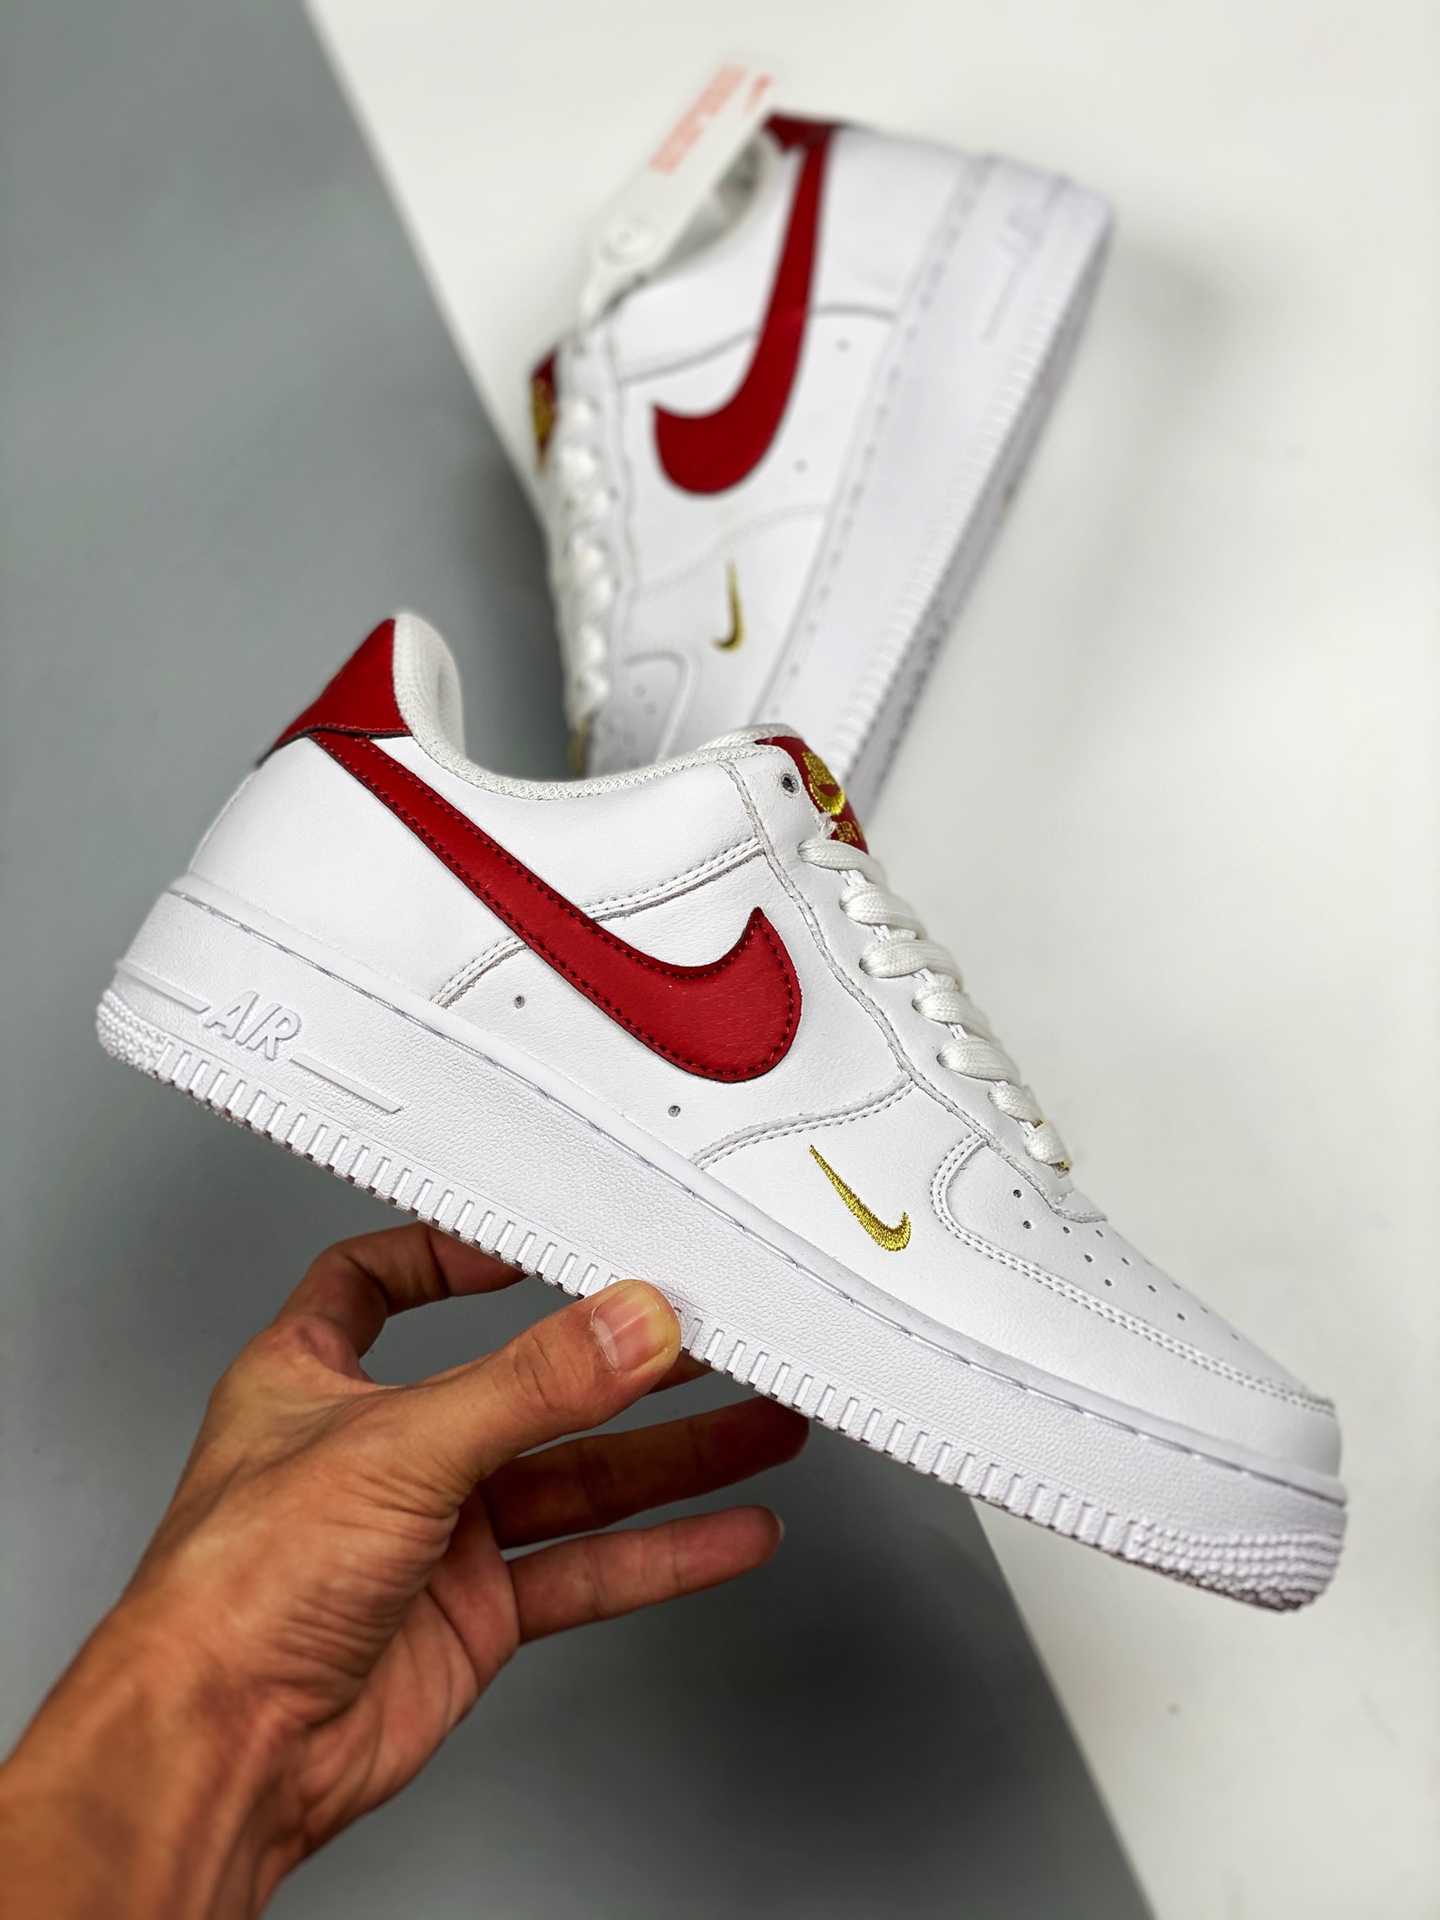  Nike Lab Air Force 1 High x RT Shoes (10.5, Gym Red/Black/White/Opti  Yellow)